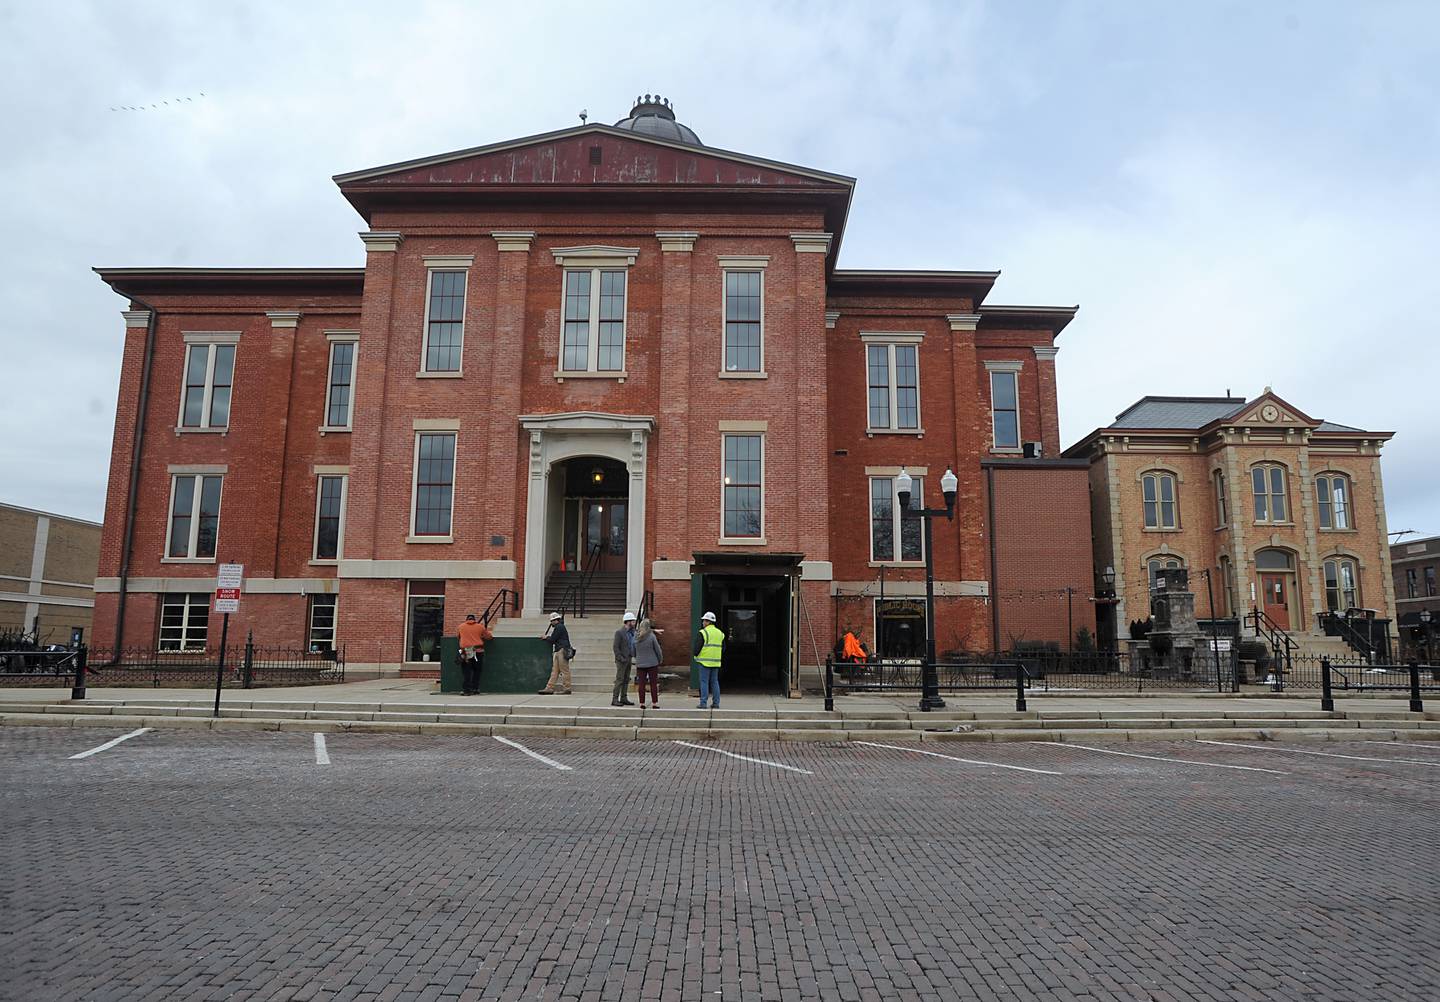 The Old Courthouse and Sheriff's House are pictured Tuesday, March 1, 2022, in Woodstock.  The renovation of the court building has started, with construction and demolition.